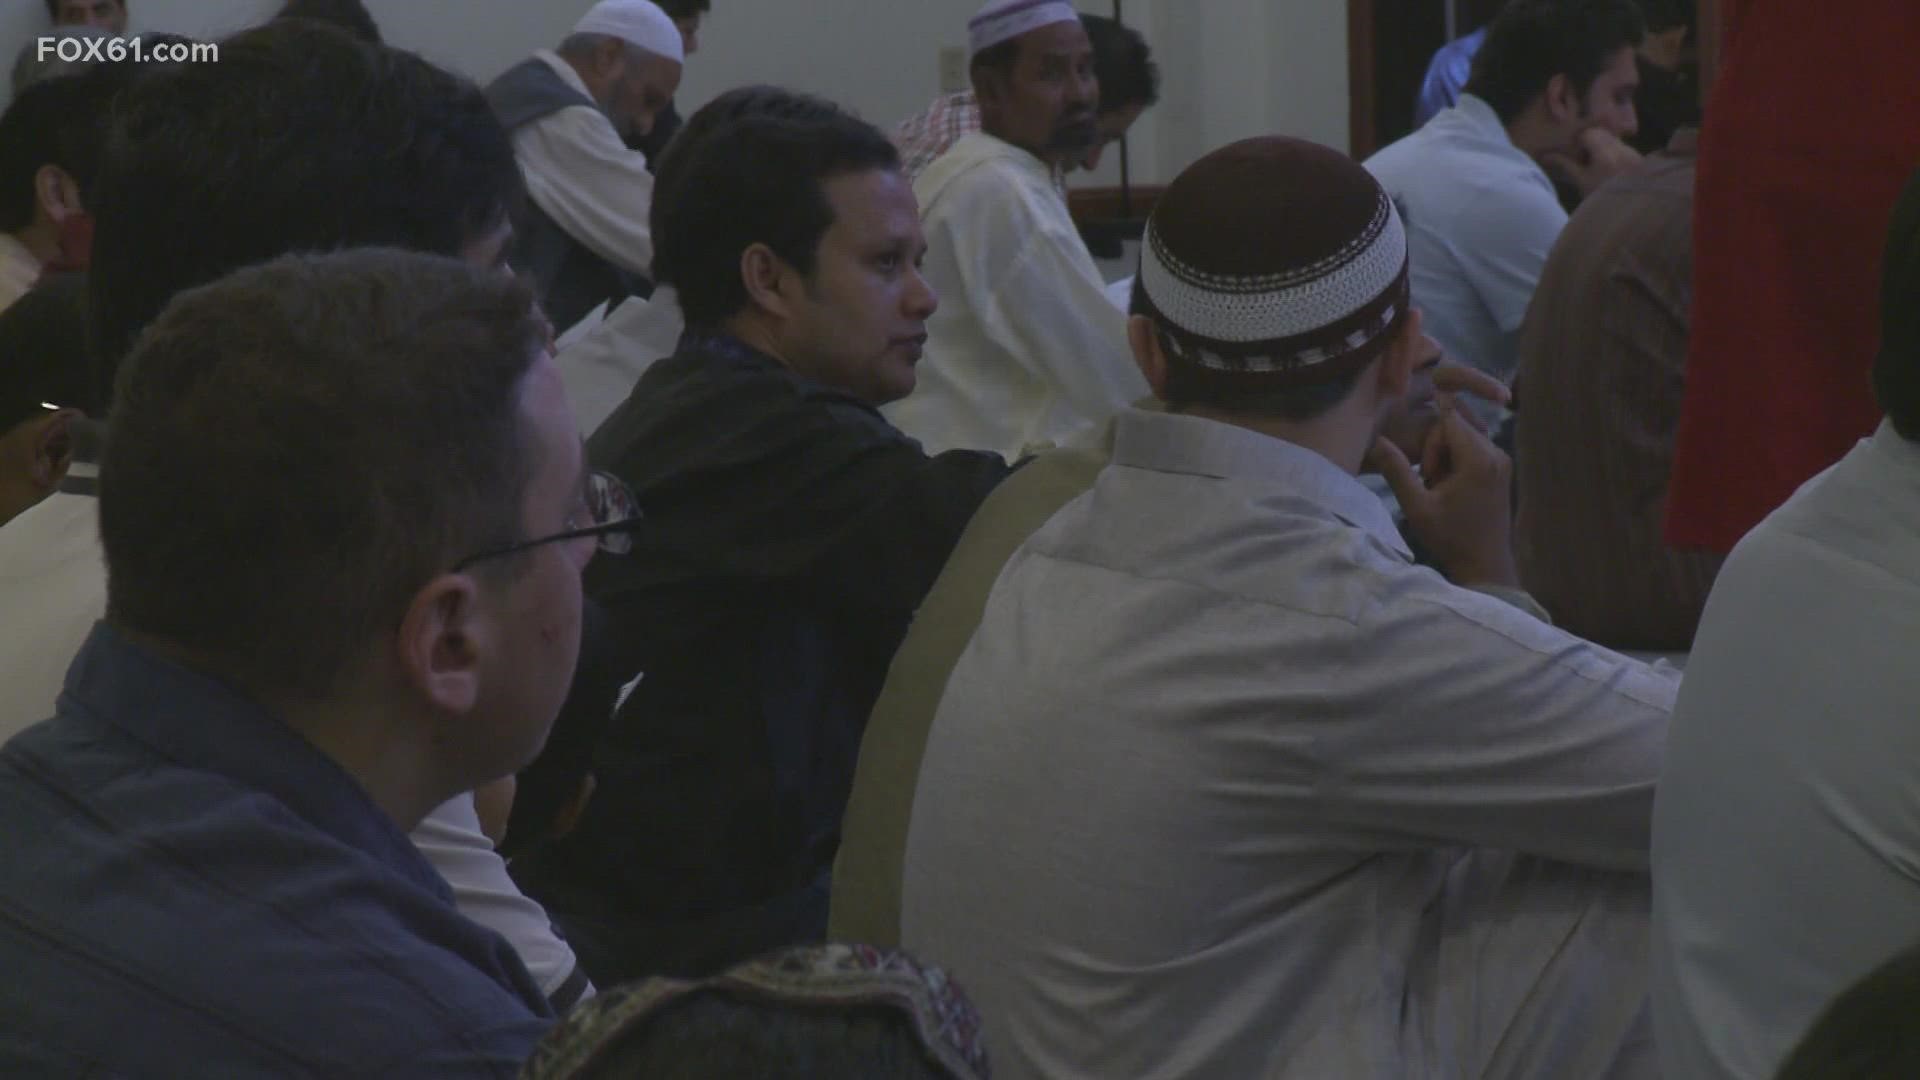 Mobashar Akram, the general secretary of The Islamic Center of Connecticut, discusses the meaning of Ramadan and Eid al-Fitr for Muslims.